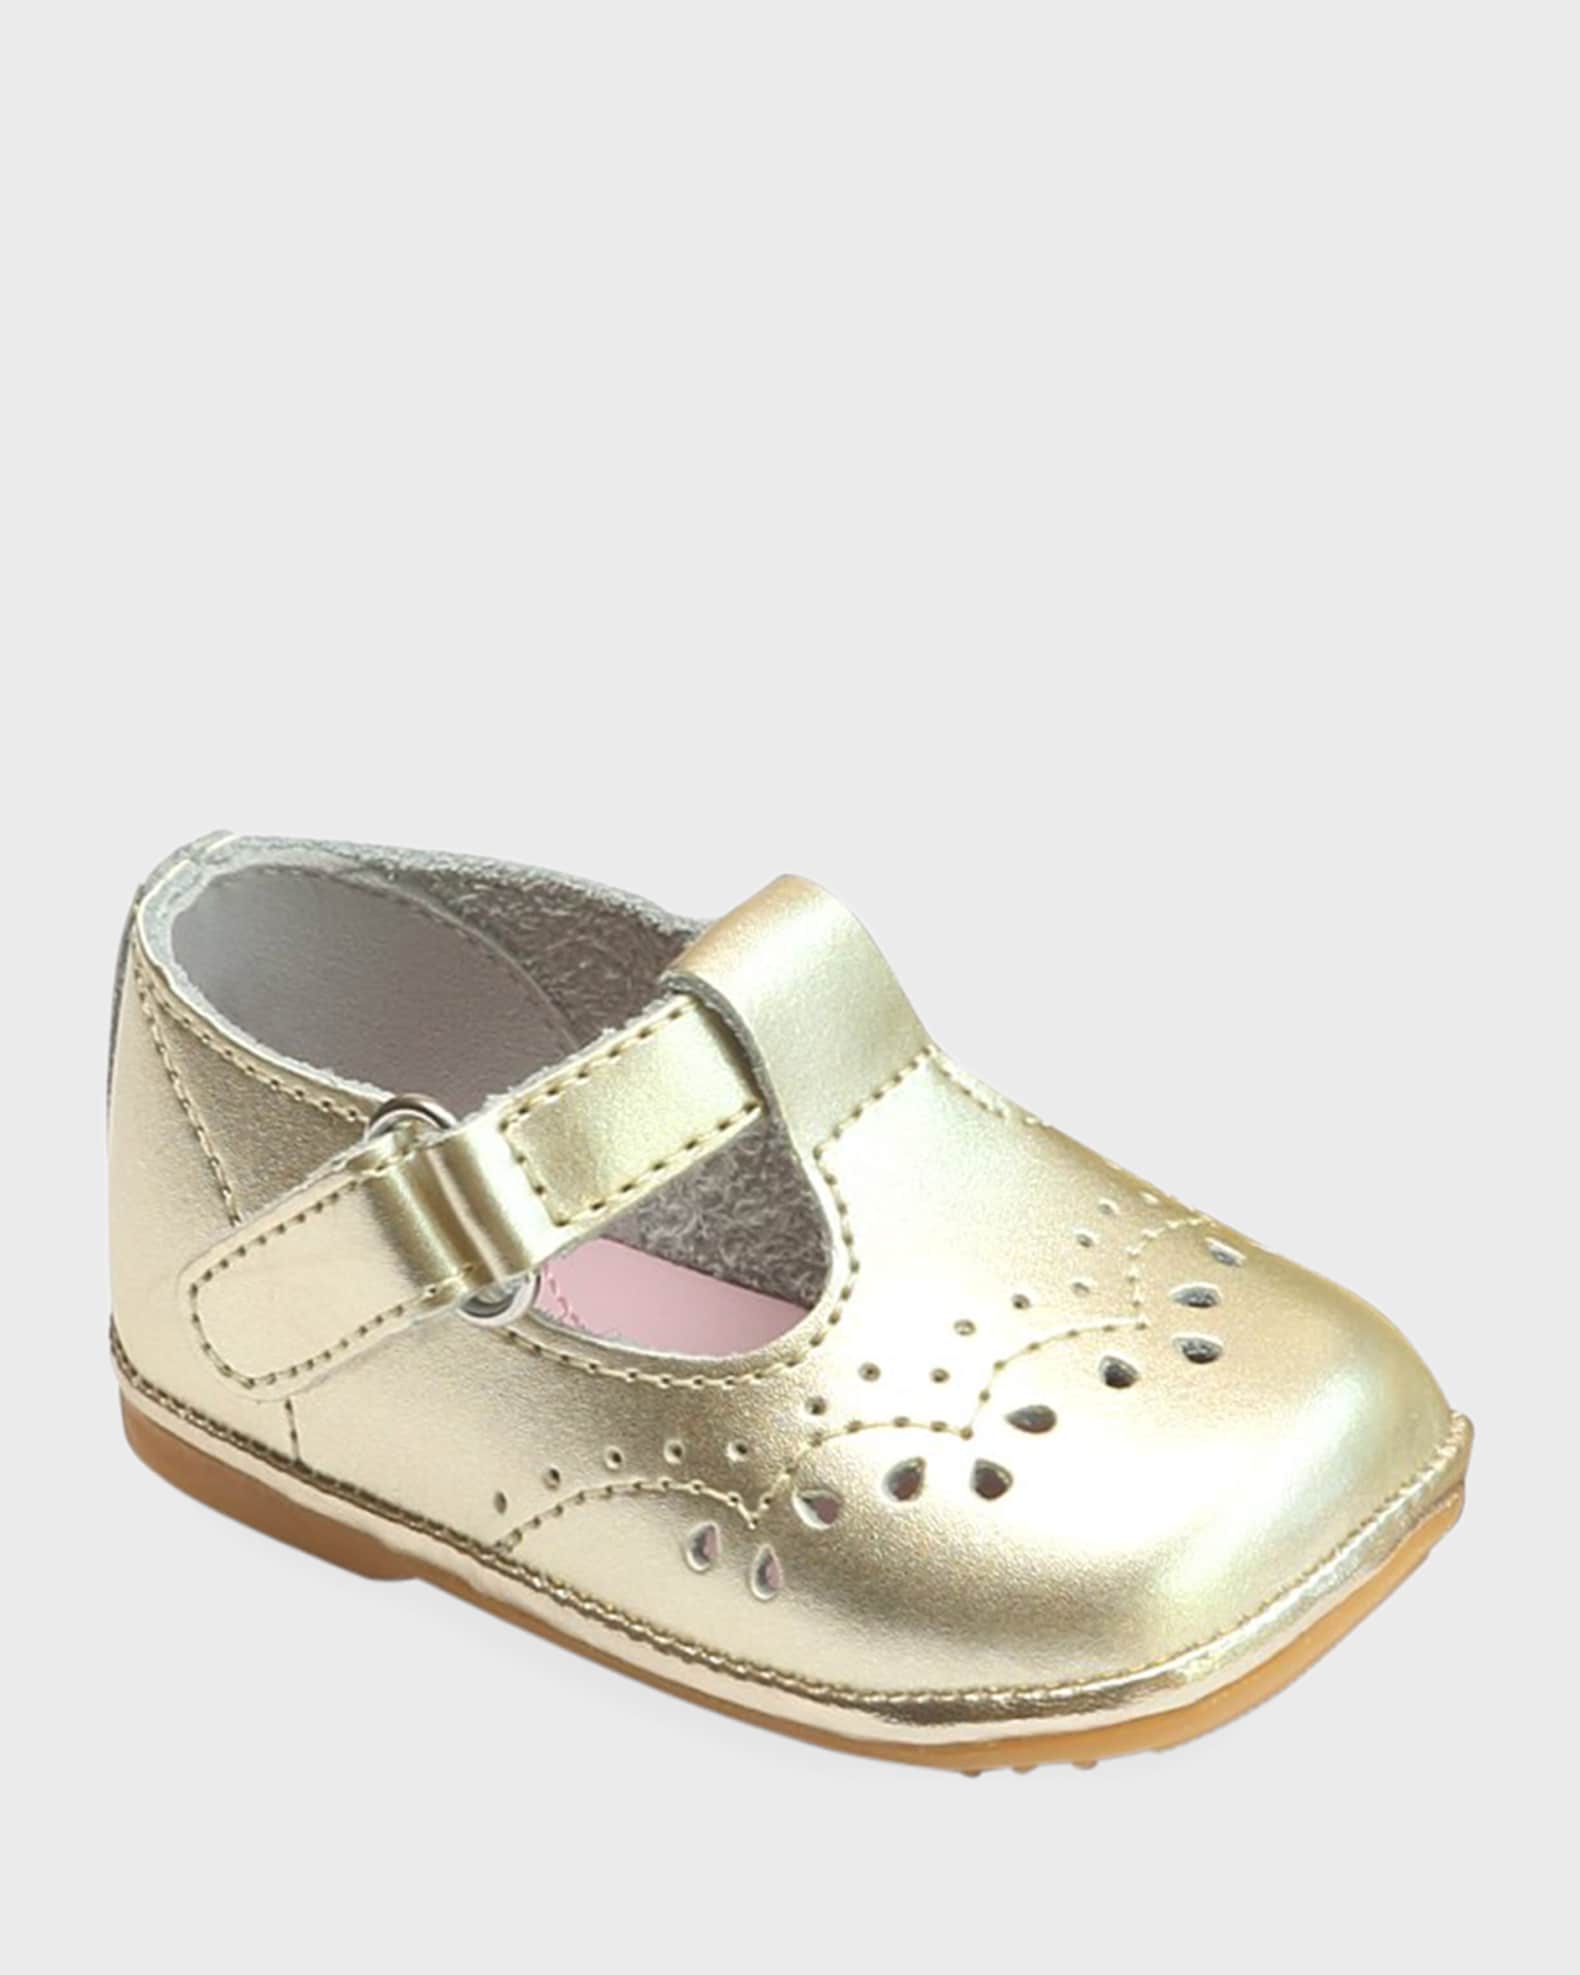 L'Amour Shoes Girl's Birdie Metallic Leather T-Strap Brogue Mary Jane ...